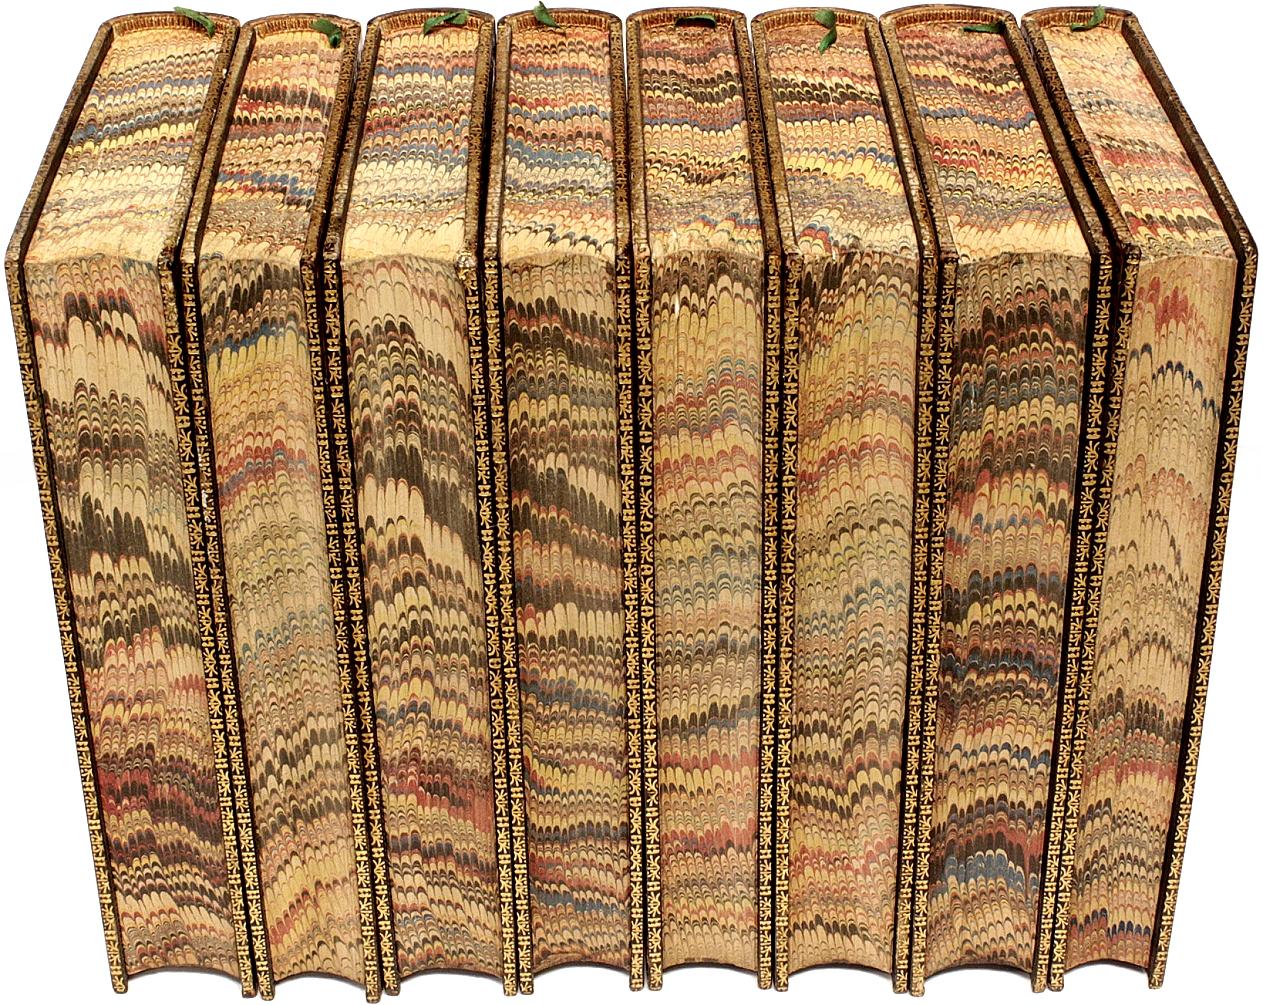 Mid-19th Century The Poetical Works of William Wordsworth, 8 Vols, Bound in Fine Full Tree Calf